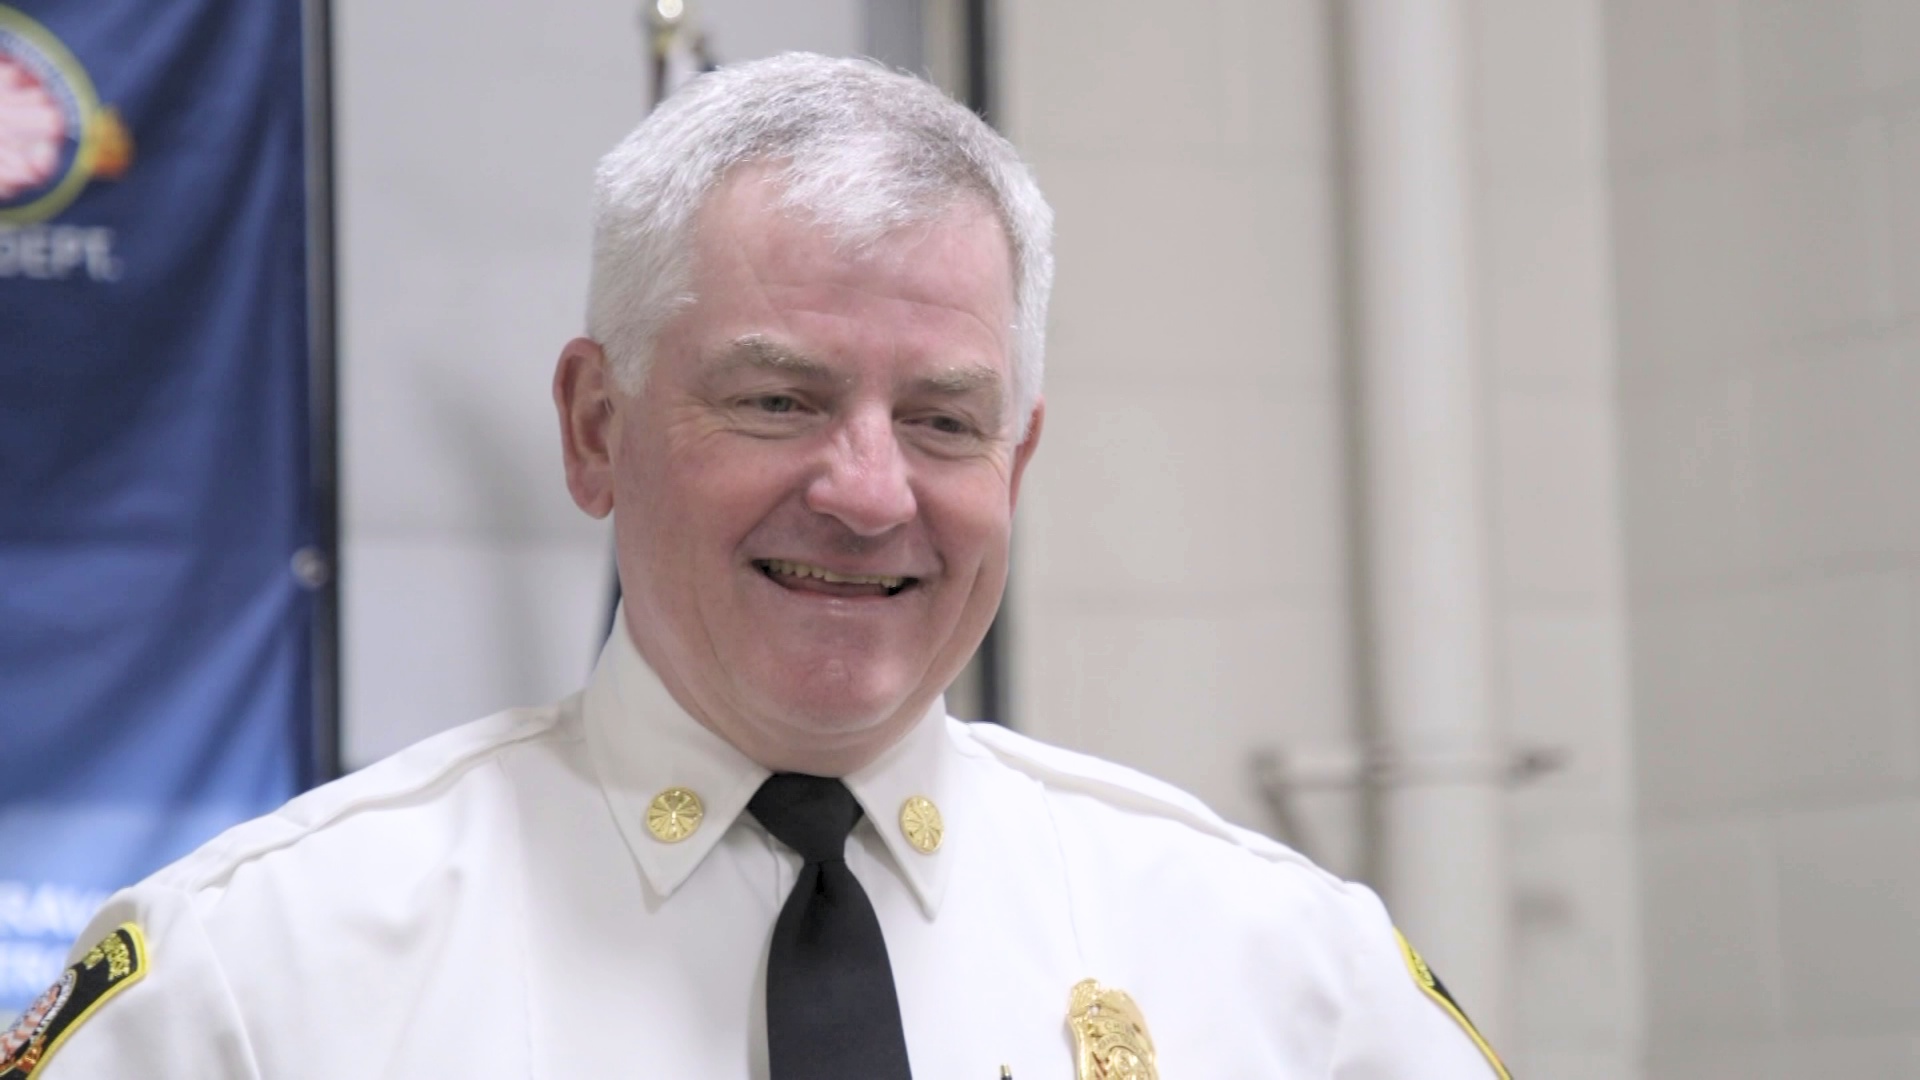 Grand Traverse Metro Fire Chief Pat Parker reflects back on a lifetime of service